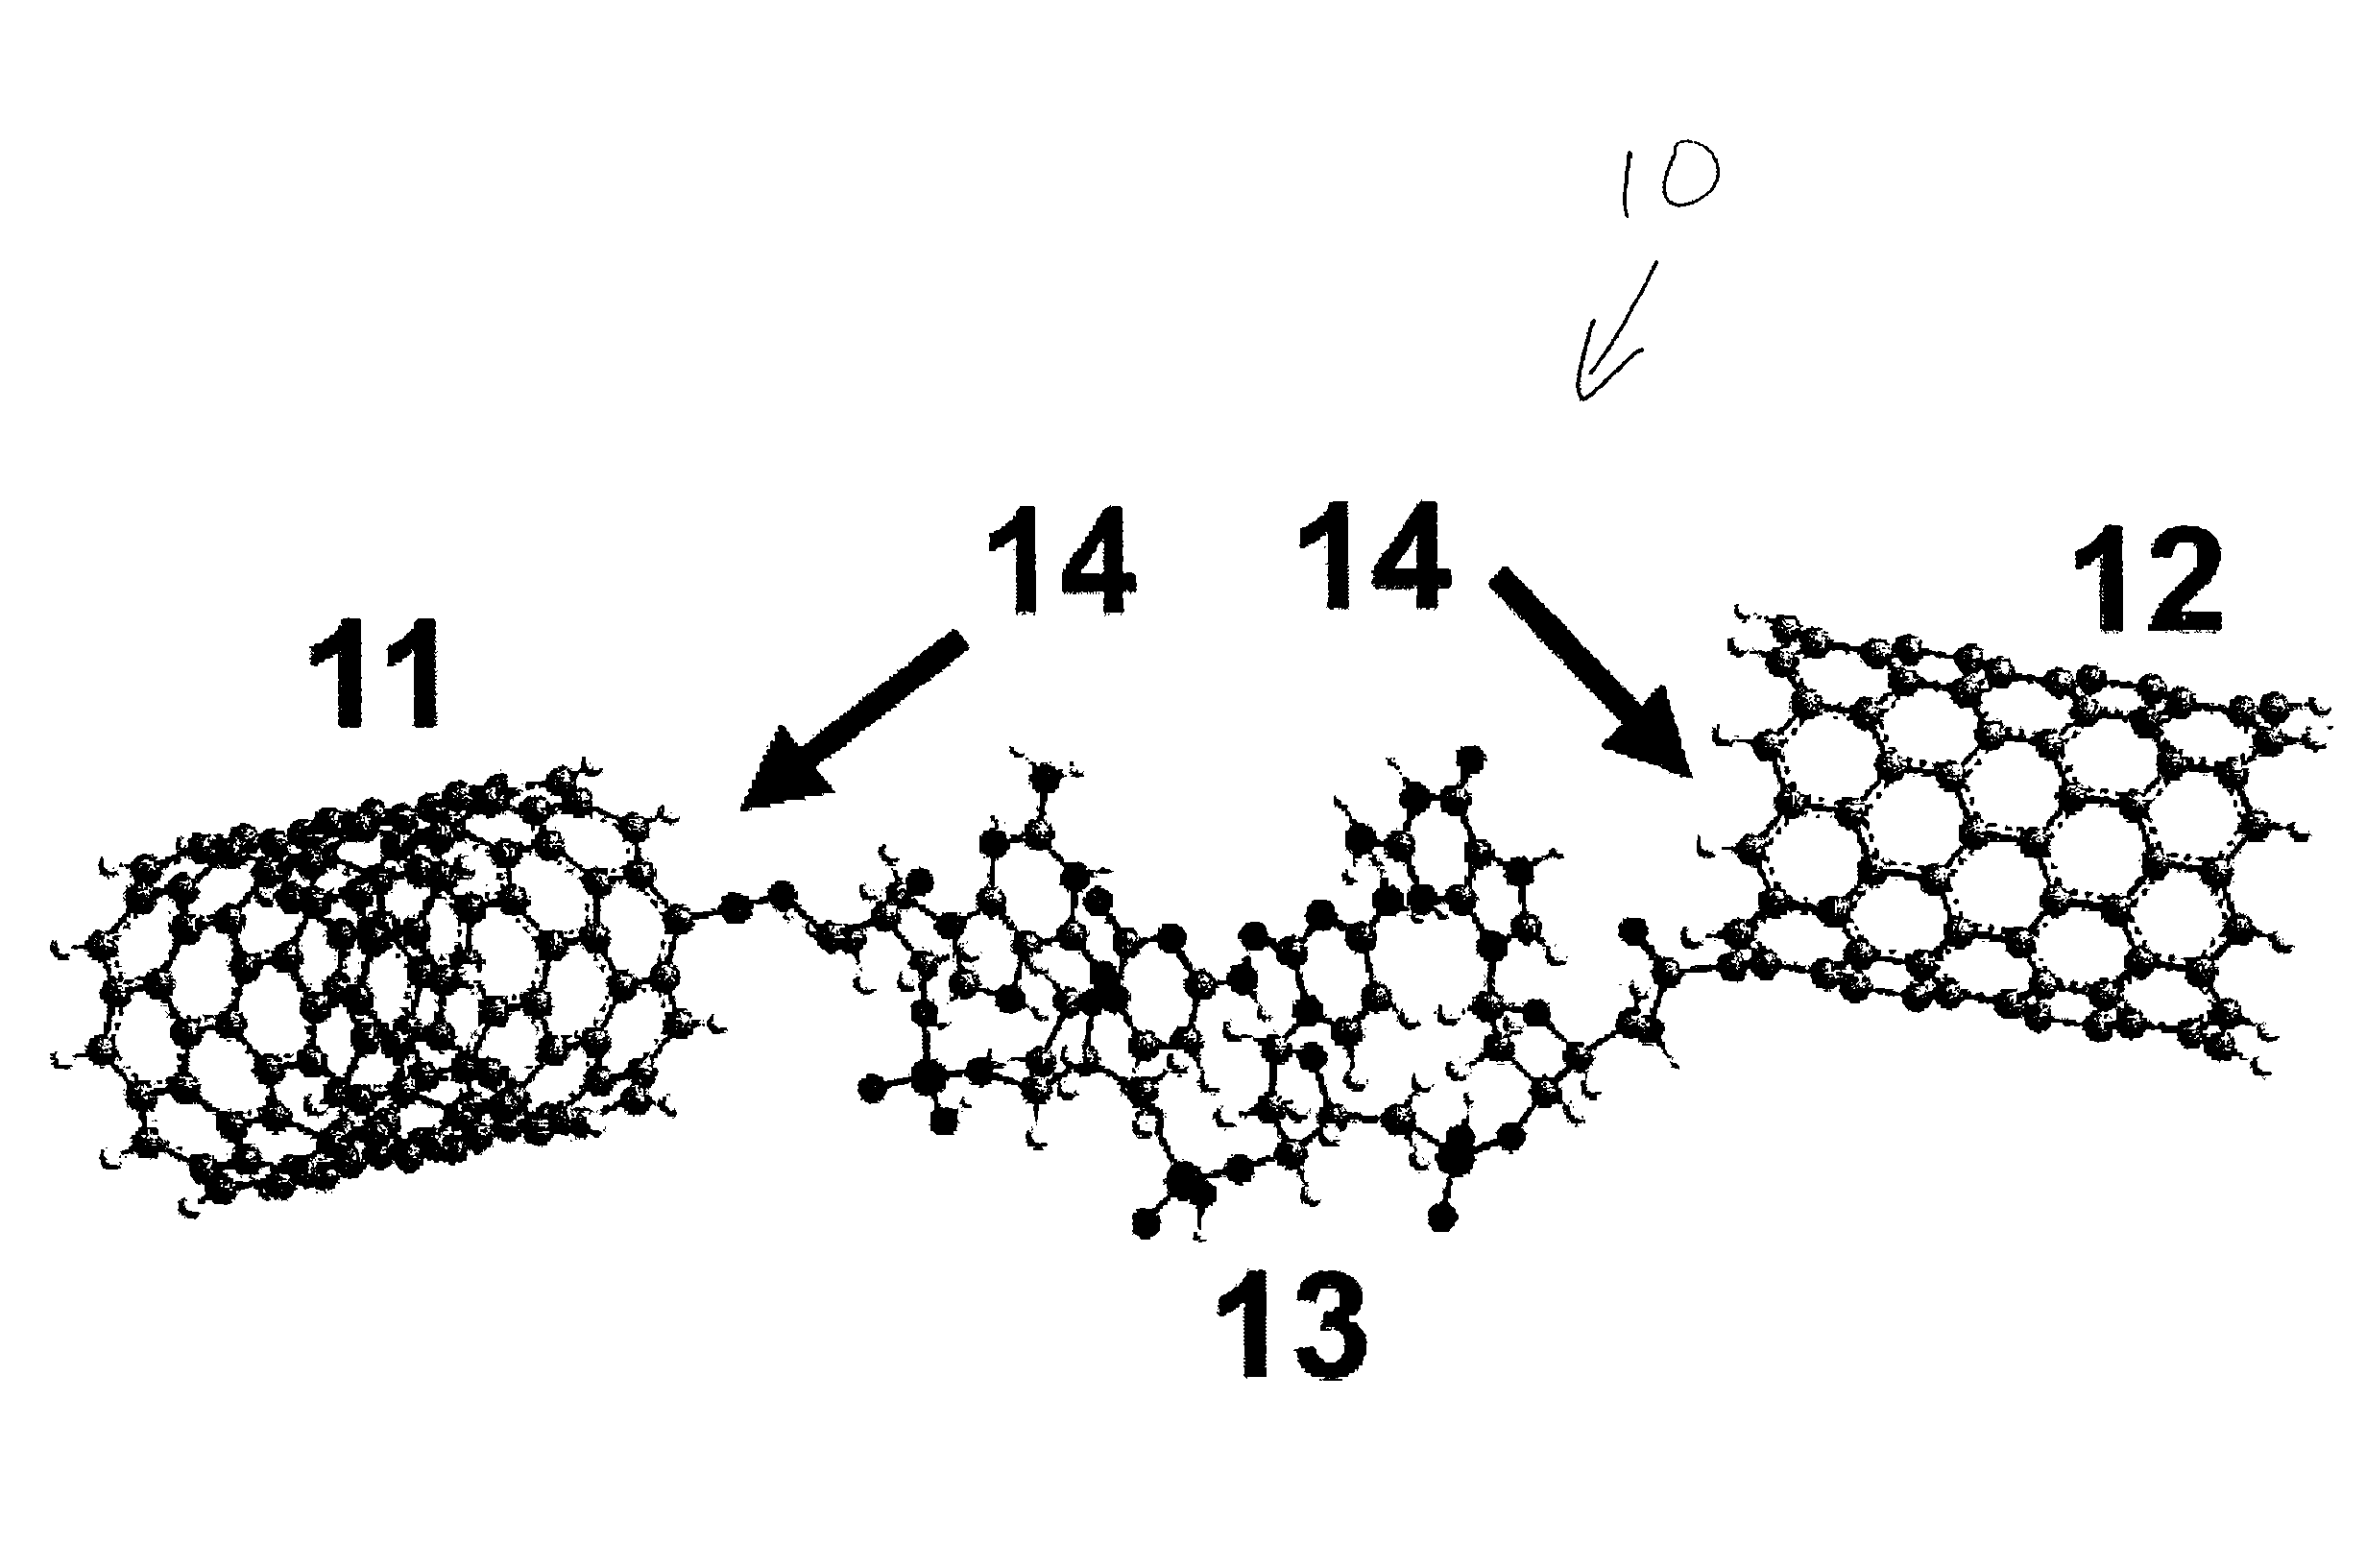 Molecular resonant tunneling diode